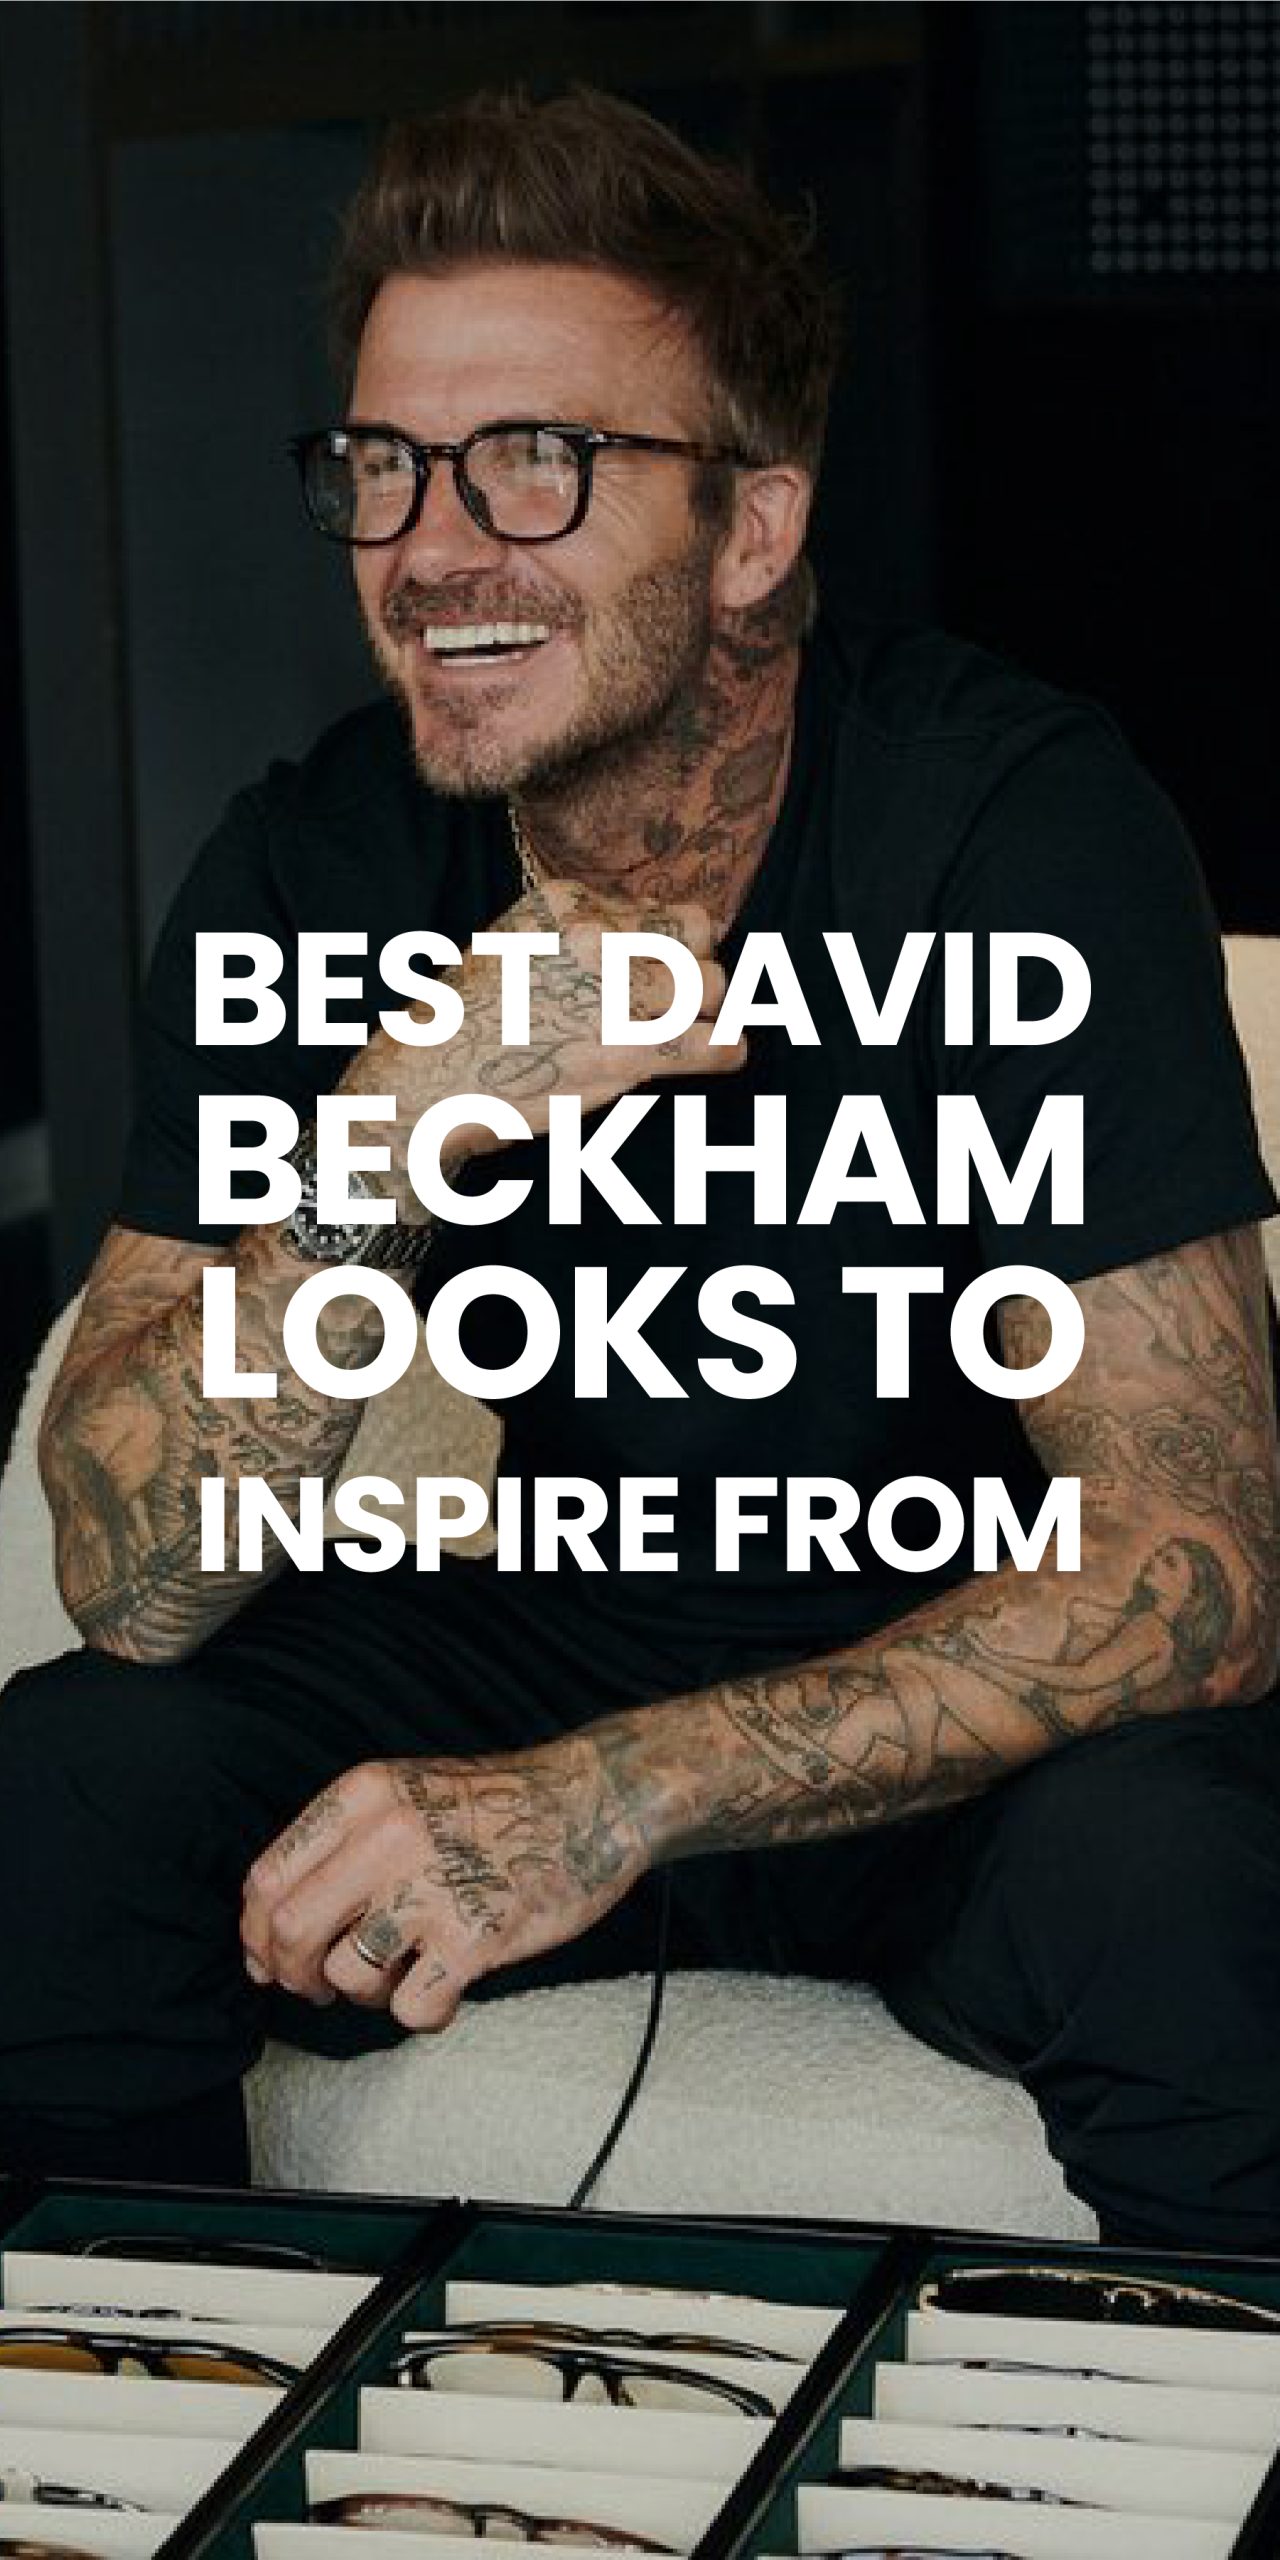 BEST DAVID BECKHAM LOOKS TO INSPIRE FROM